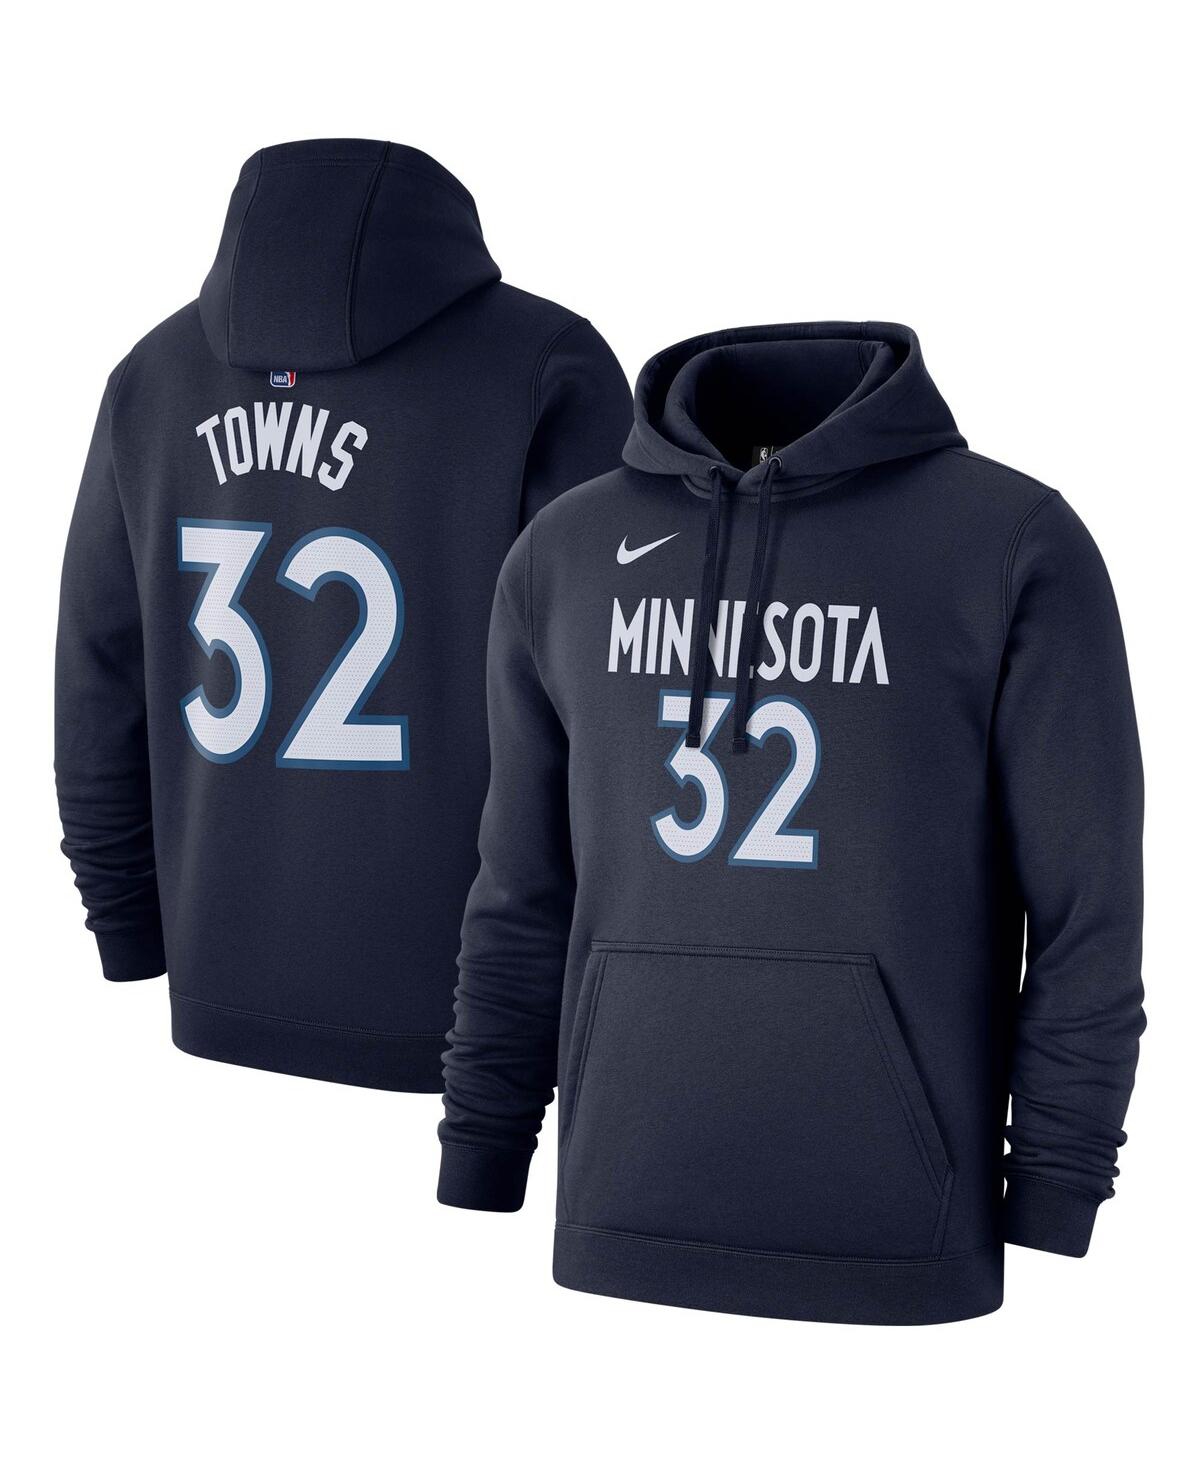 Nike Men's  Karl-anthony Towns Navy Minnesota Timberwolves 2019/20 Name And Number Pullover Hoodie